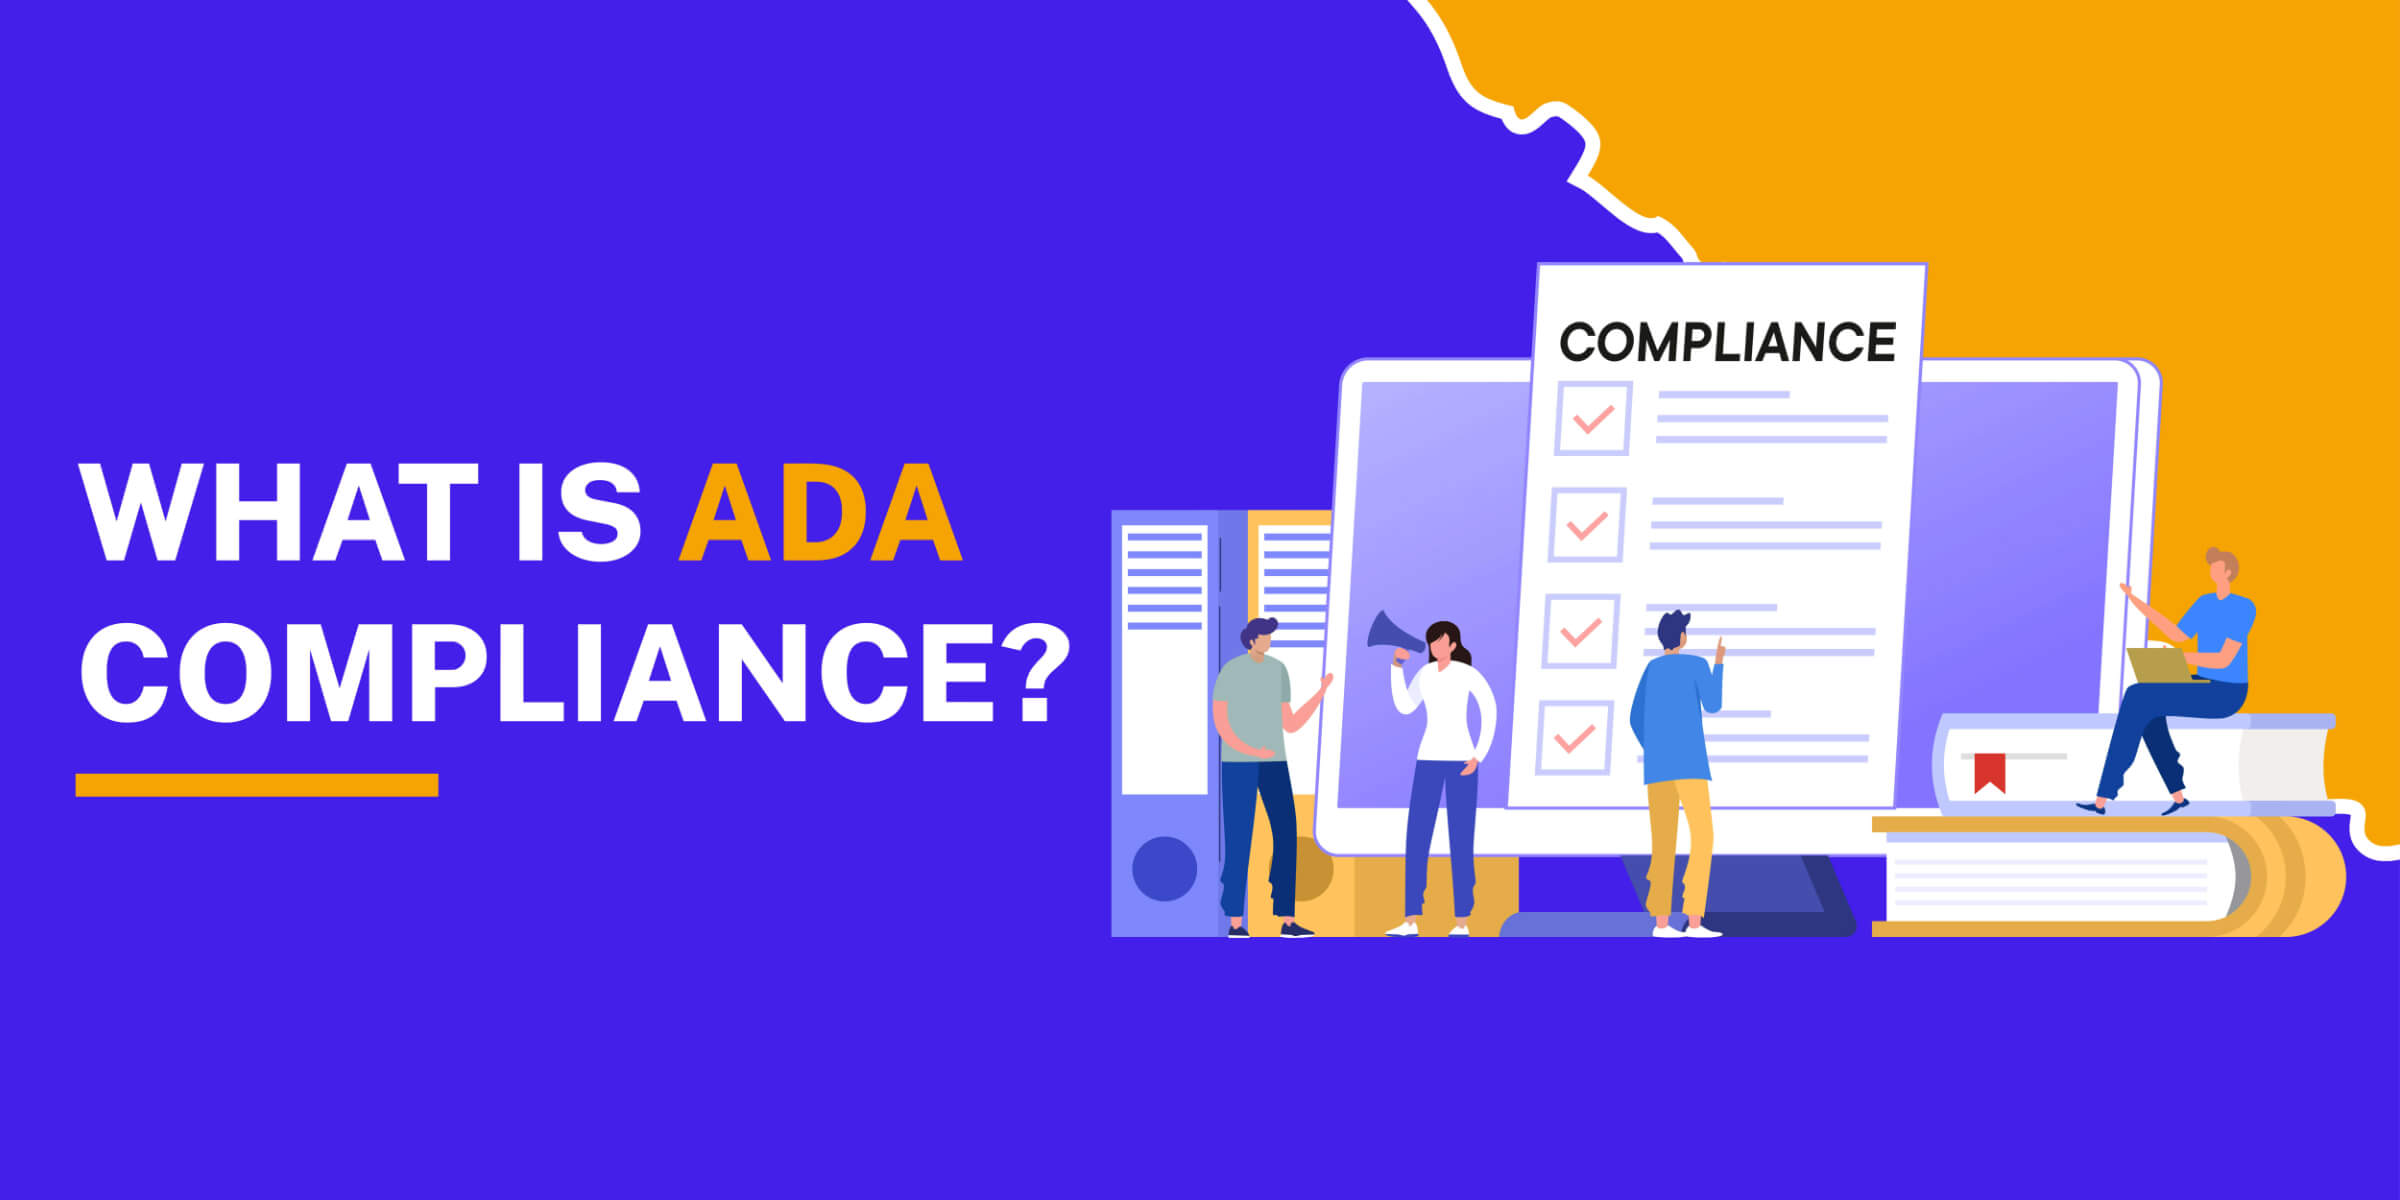 What Is ADA Compliance